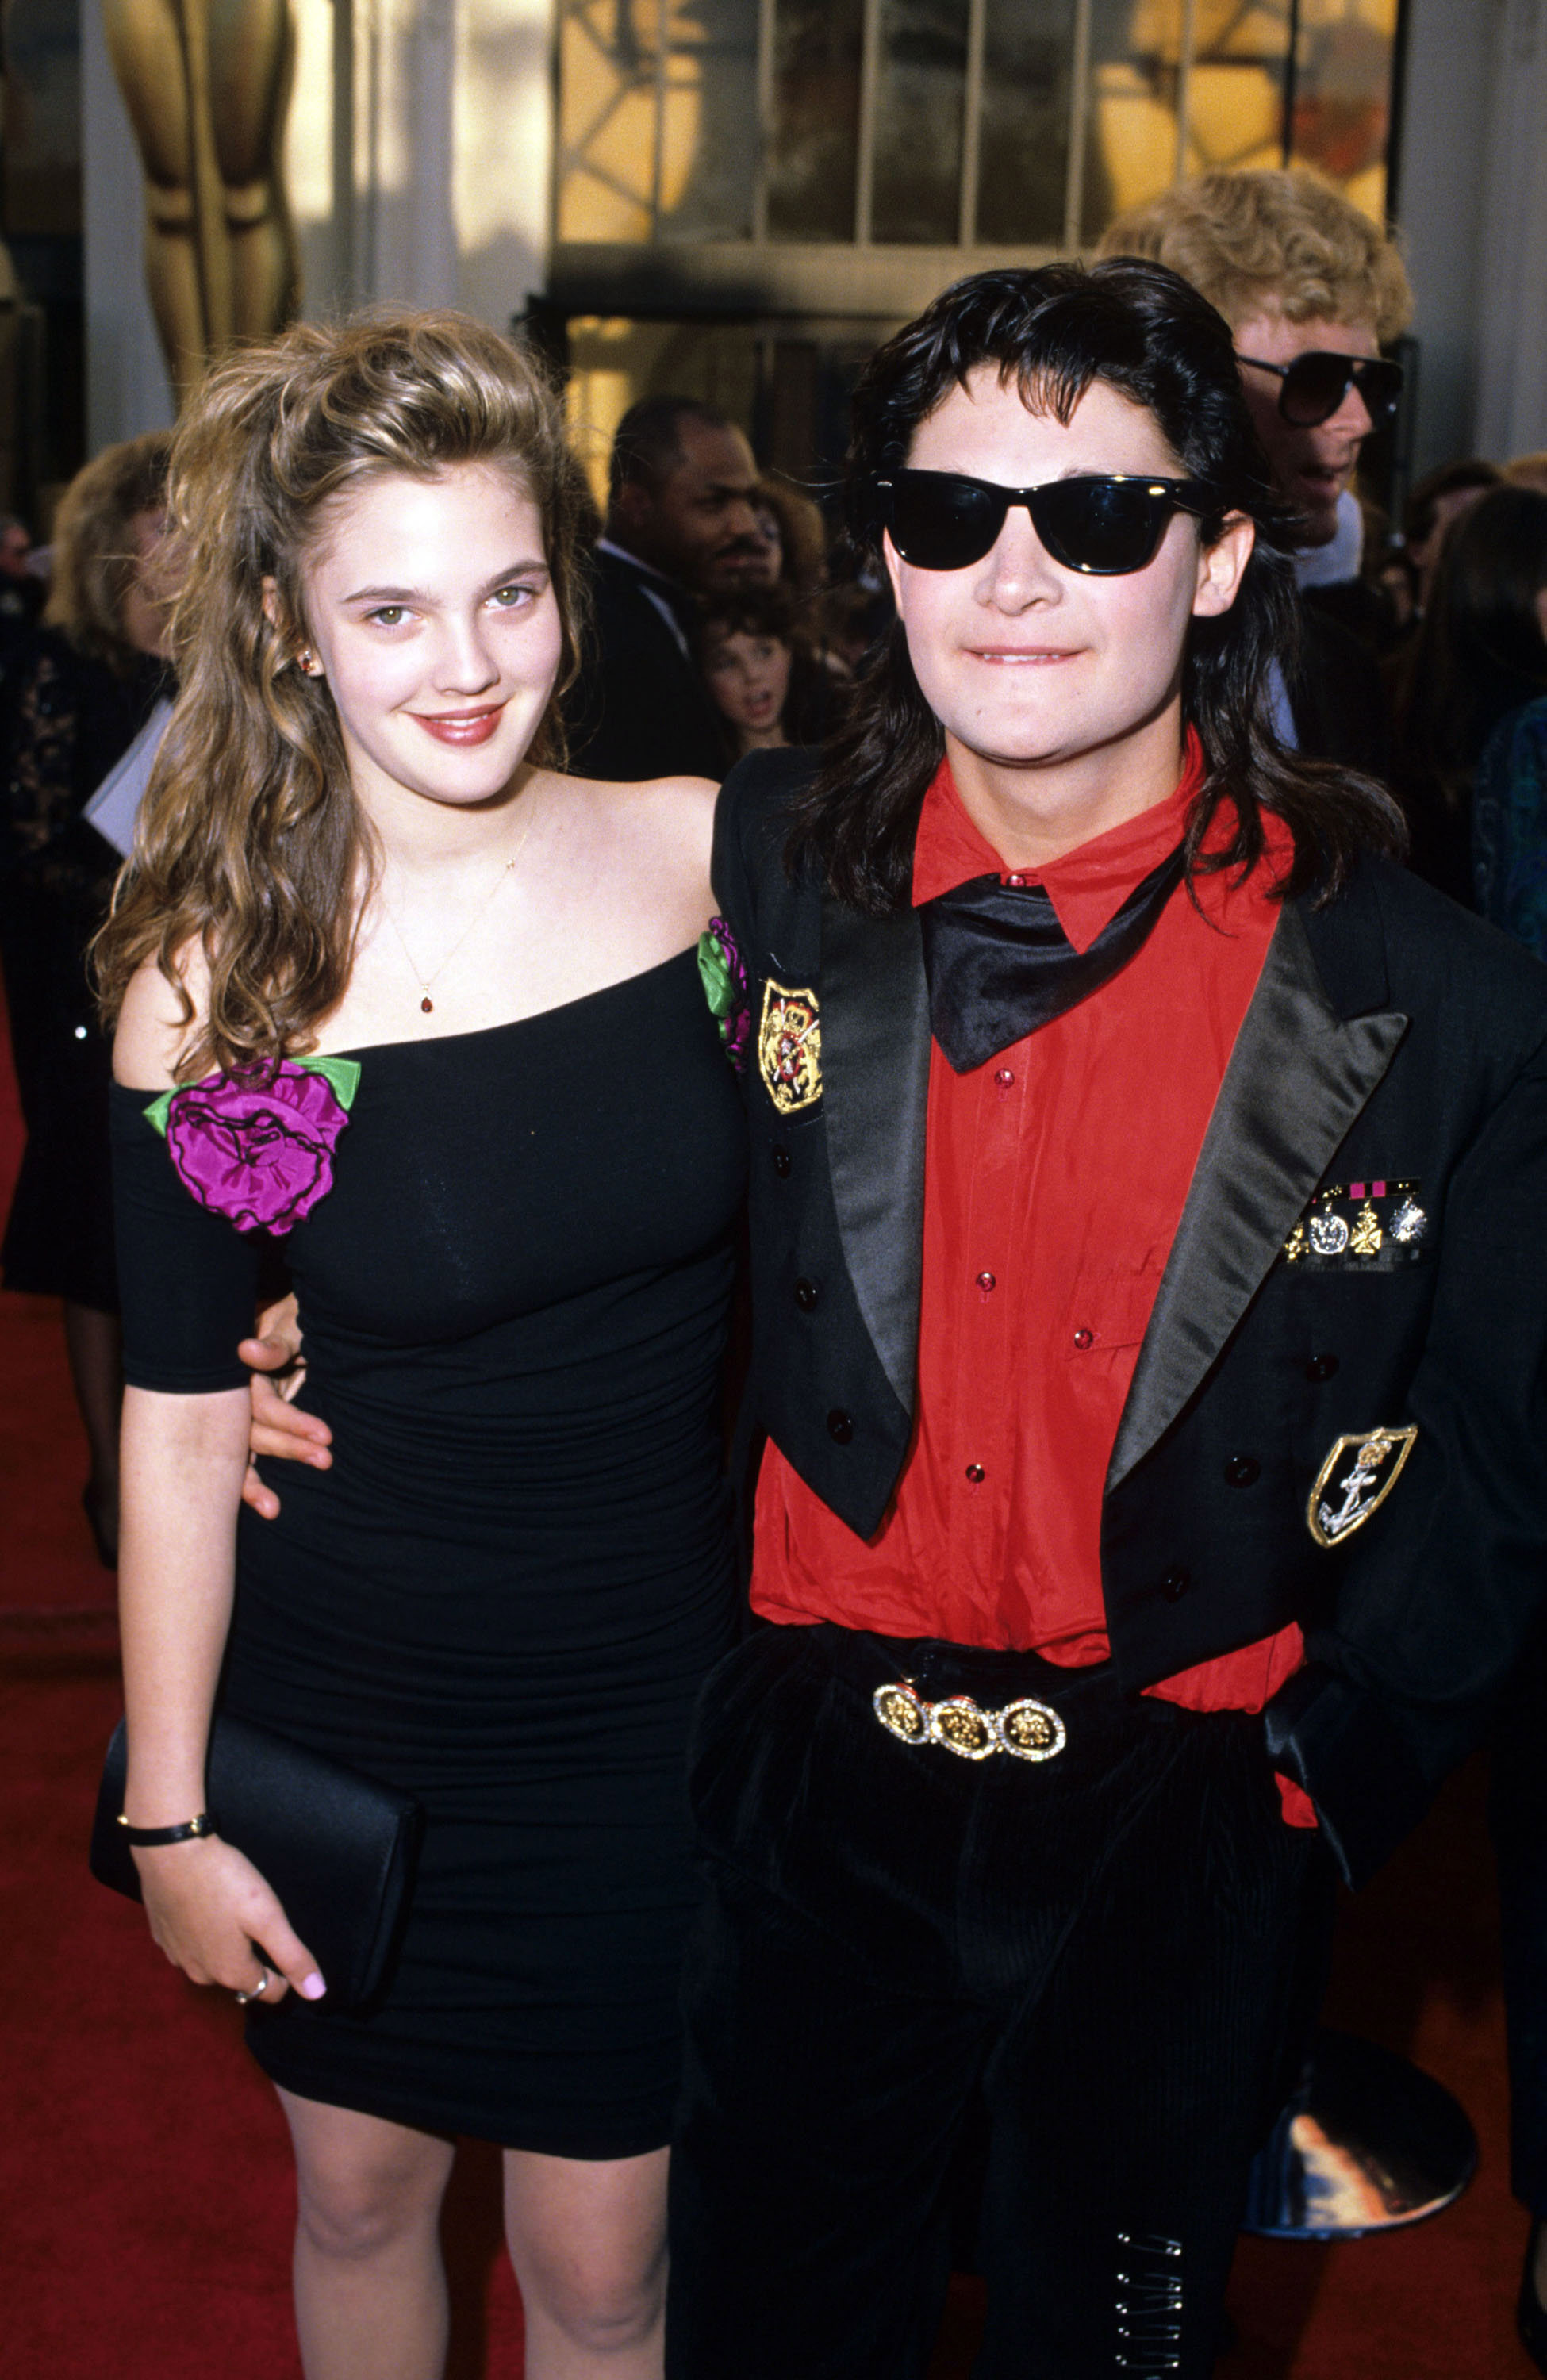 Drew Barrymore and Corey Feldman attend the 1989 Oscars at the Shrine Auditorium in Los Angeles, California.